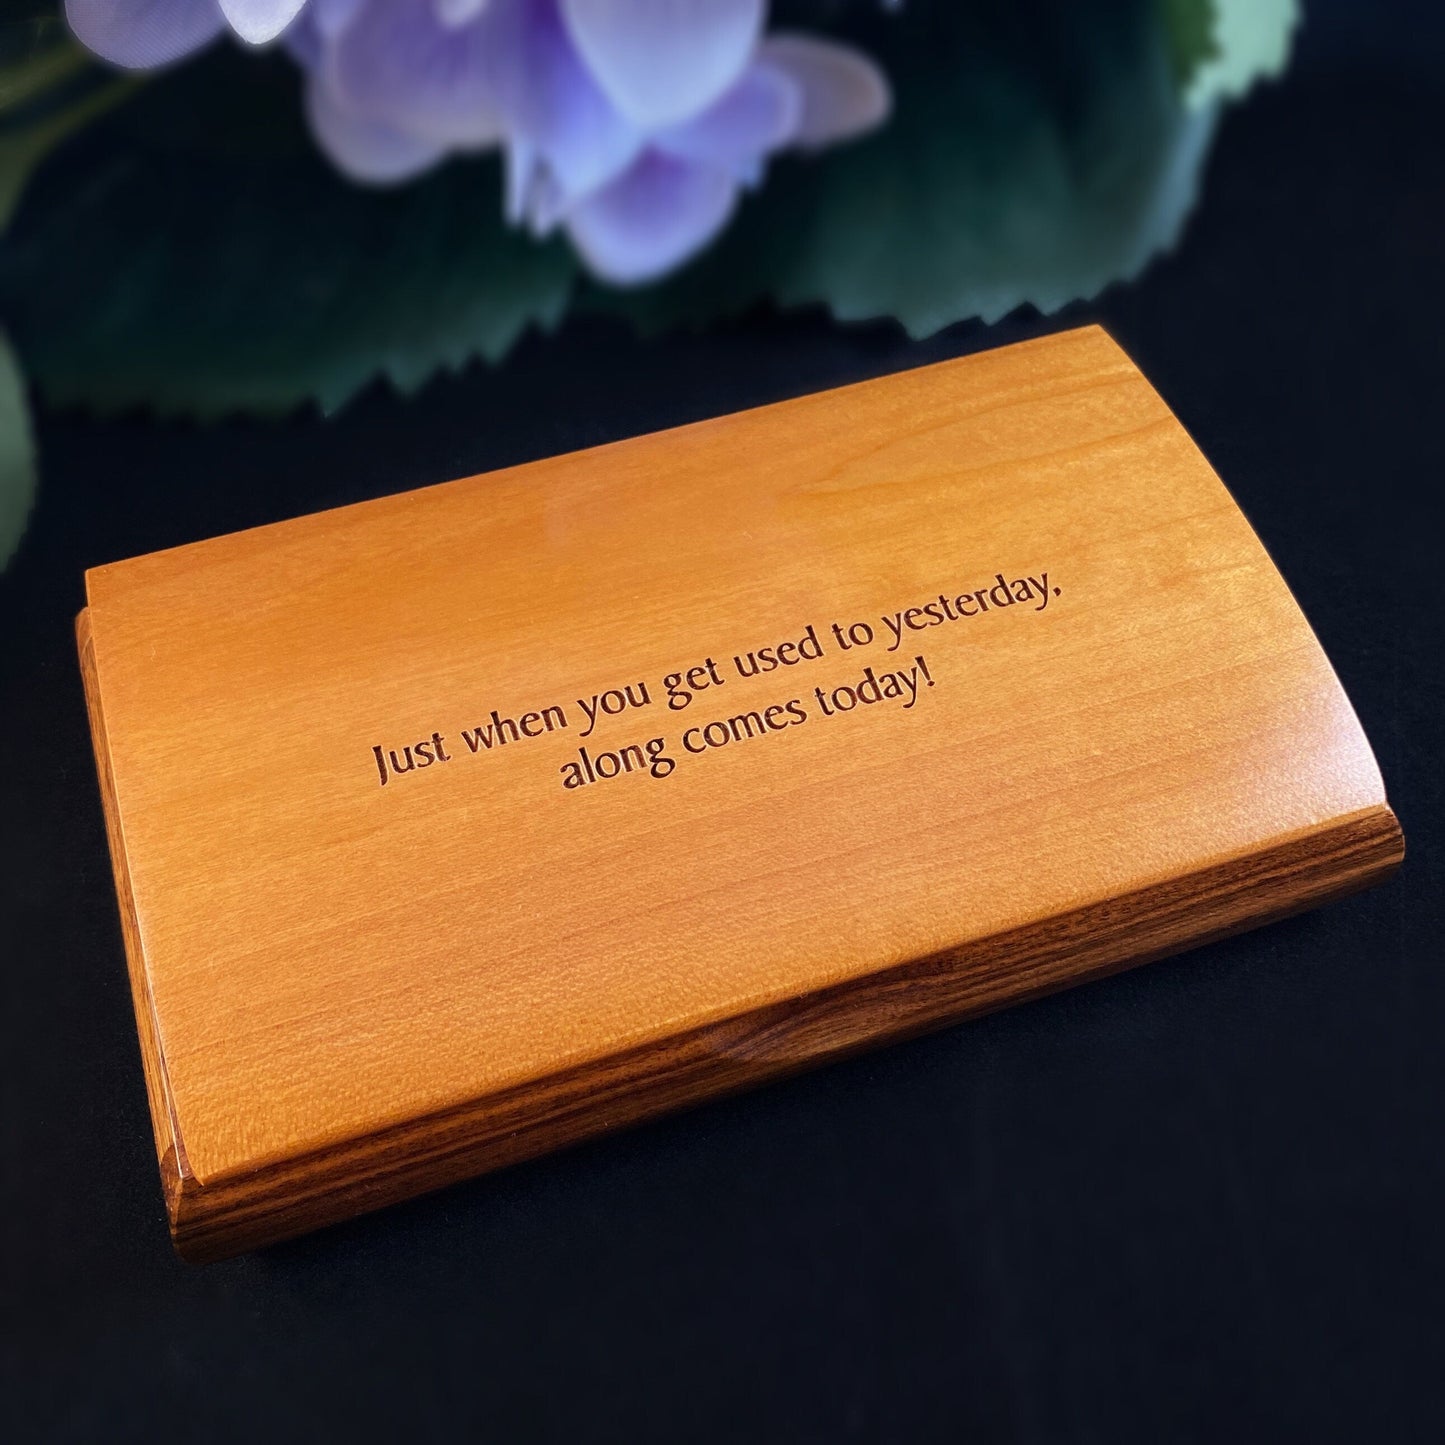 Along Comes Today Quote Box, Handmade Wooden Box with Cherry and Bolivian Rosewood, Made in USA